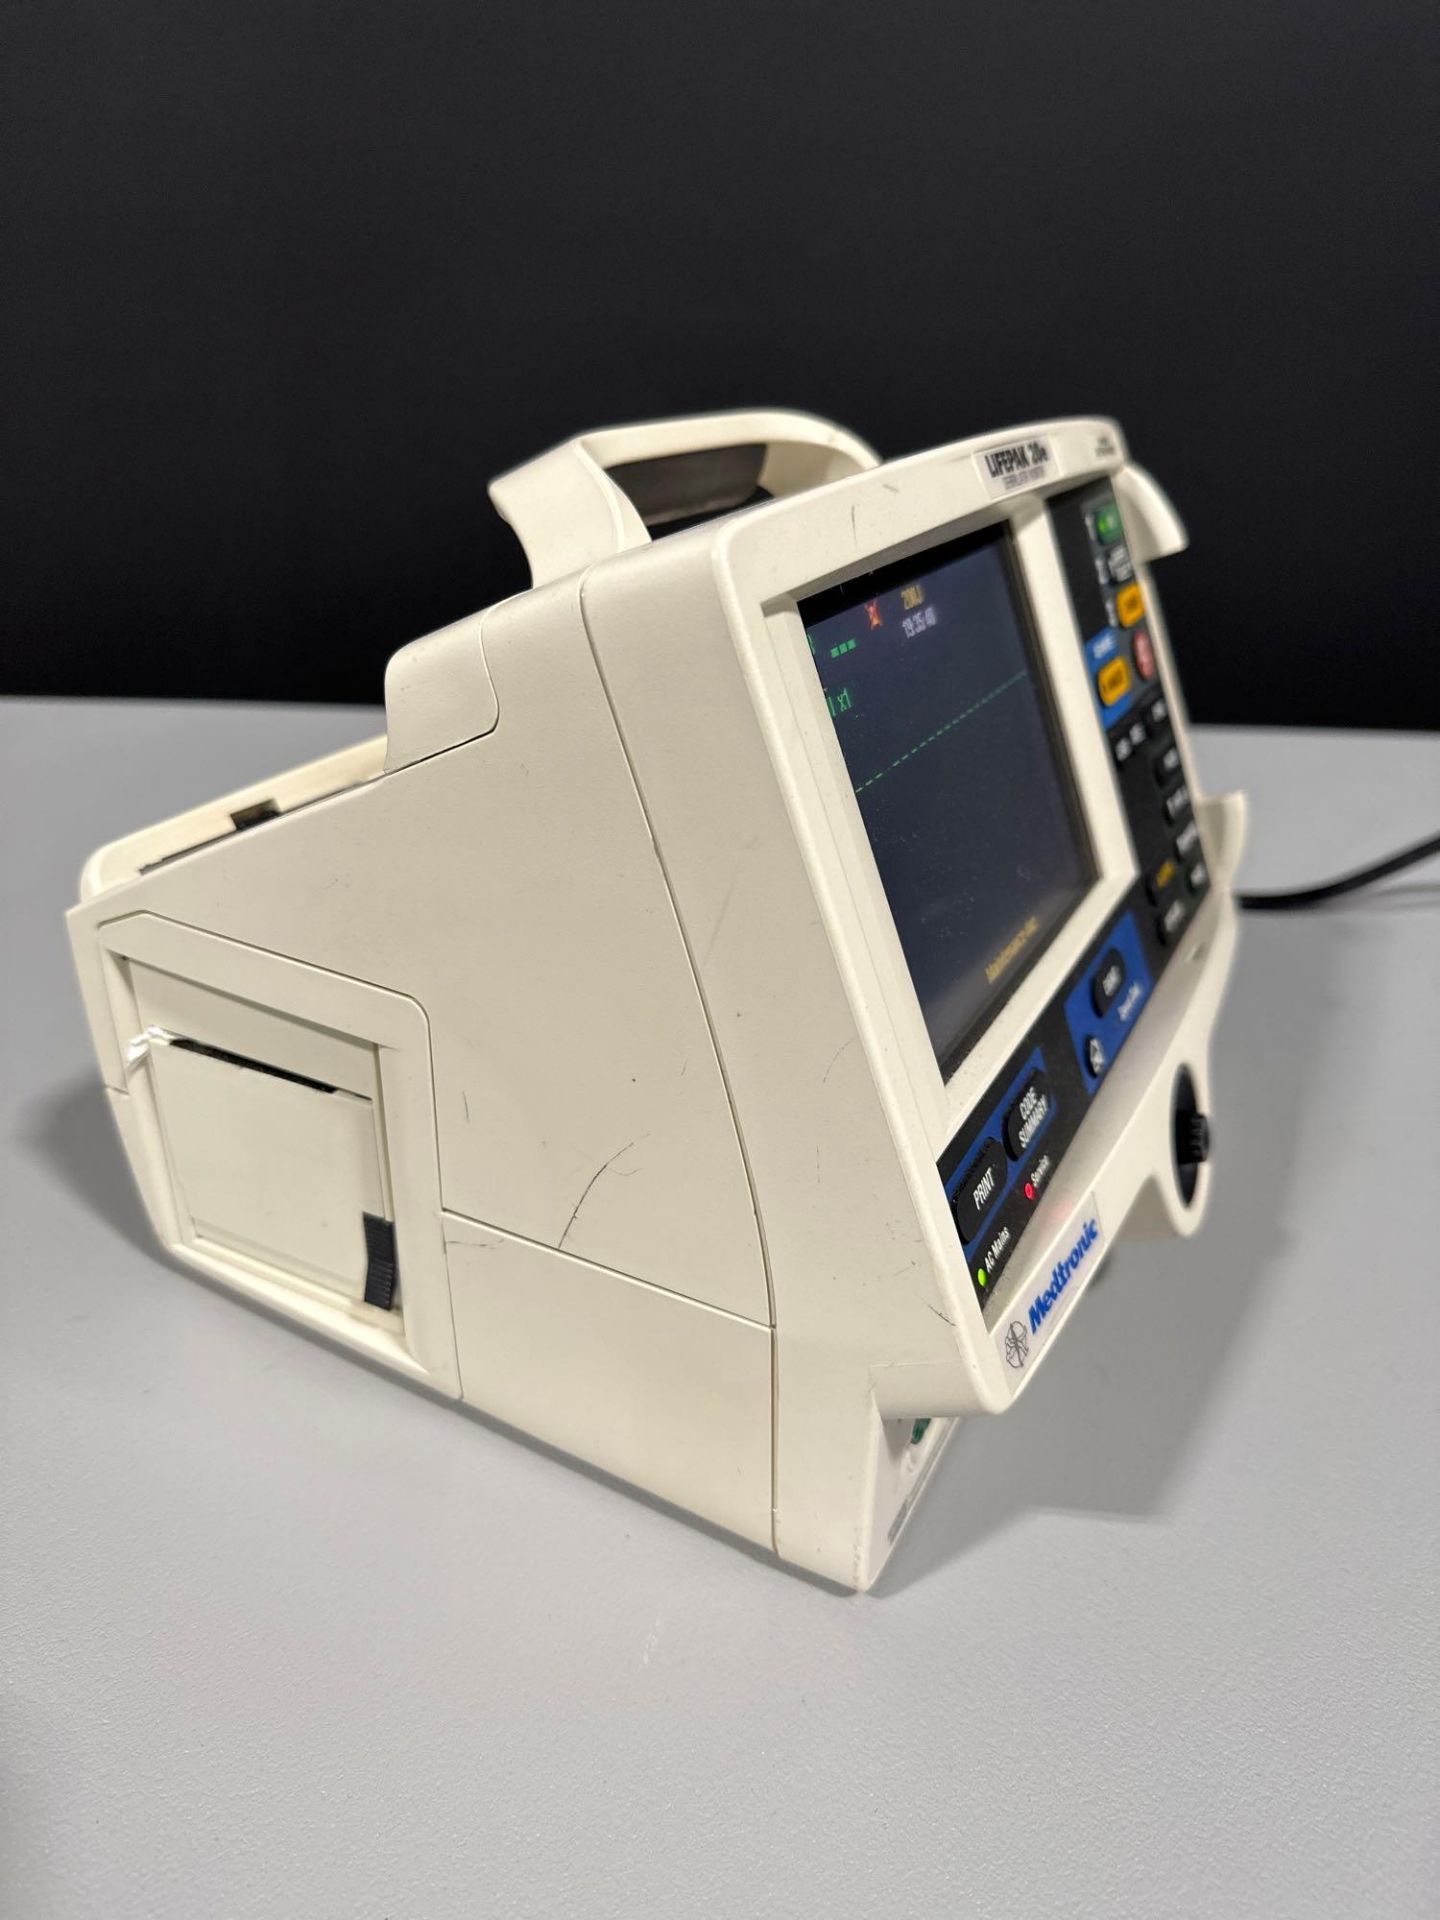 MEDTRONIC/PHYSIO CONTROL LIFEPAK 20E DEFIB WITH PACING, 3 LEAD ECG, ANALYZE (AED MODE) - Image 5 of 8